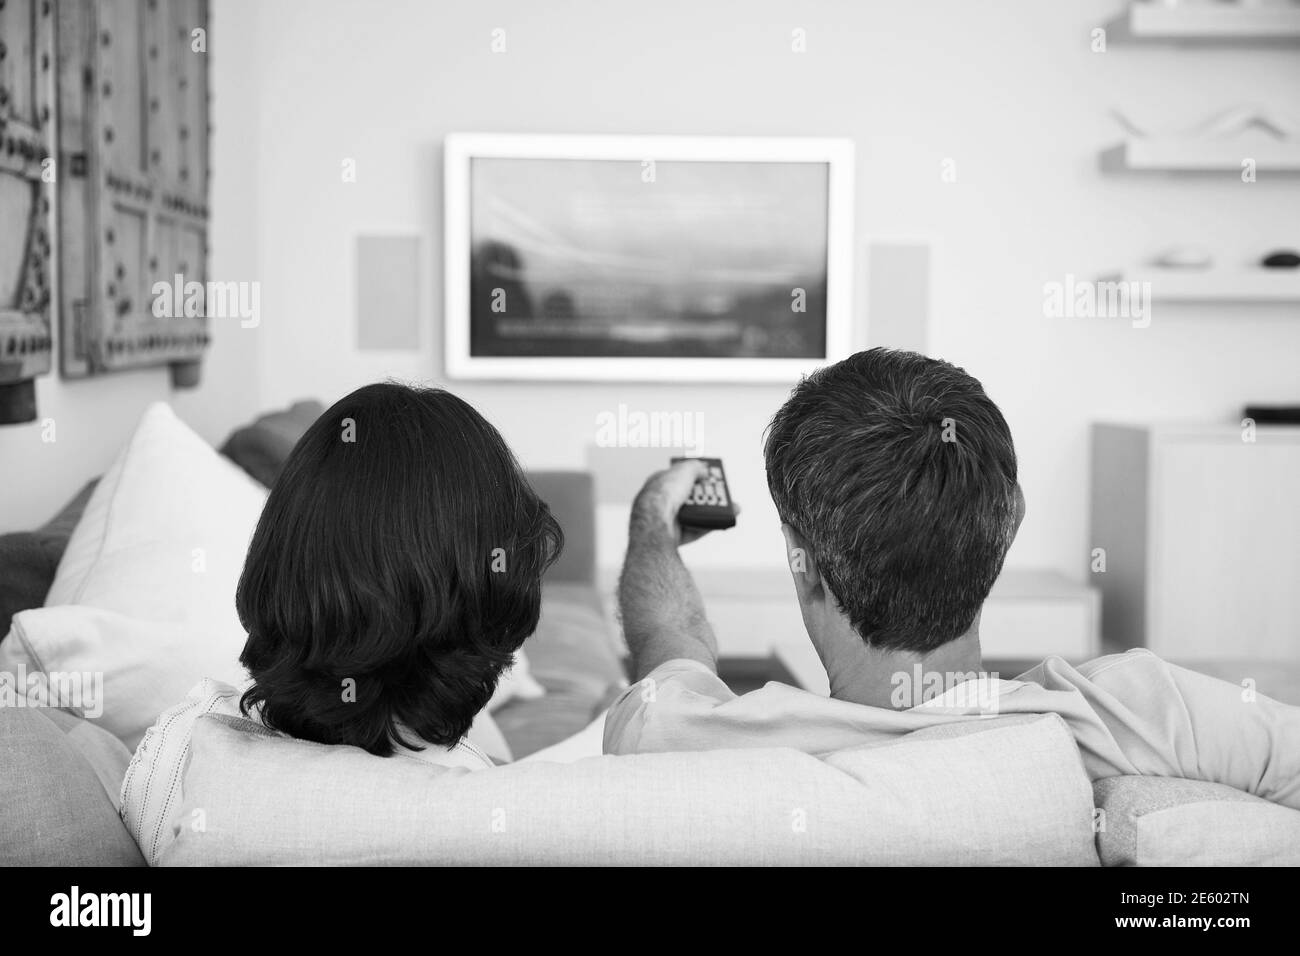 Black and white photo of couple watching television on lockdown Stock Photo